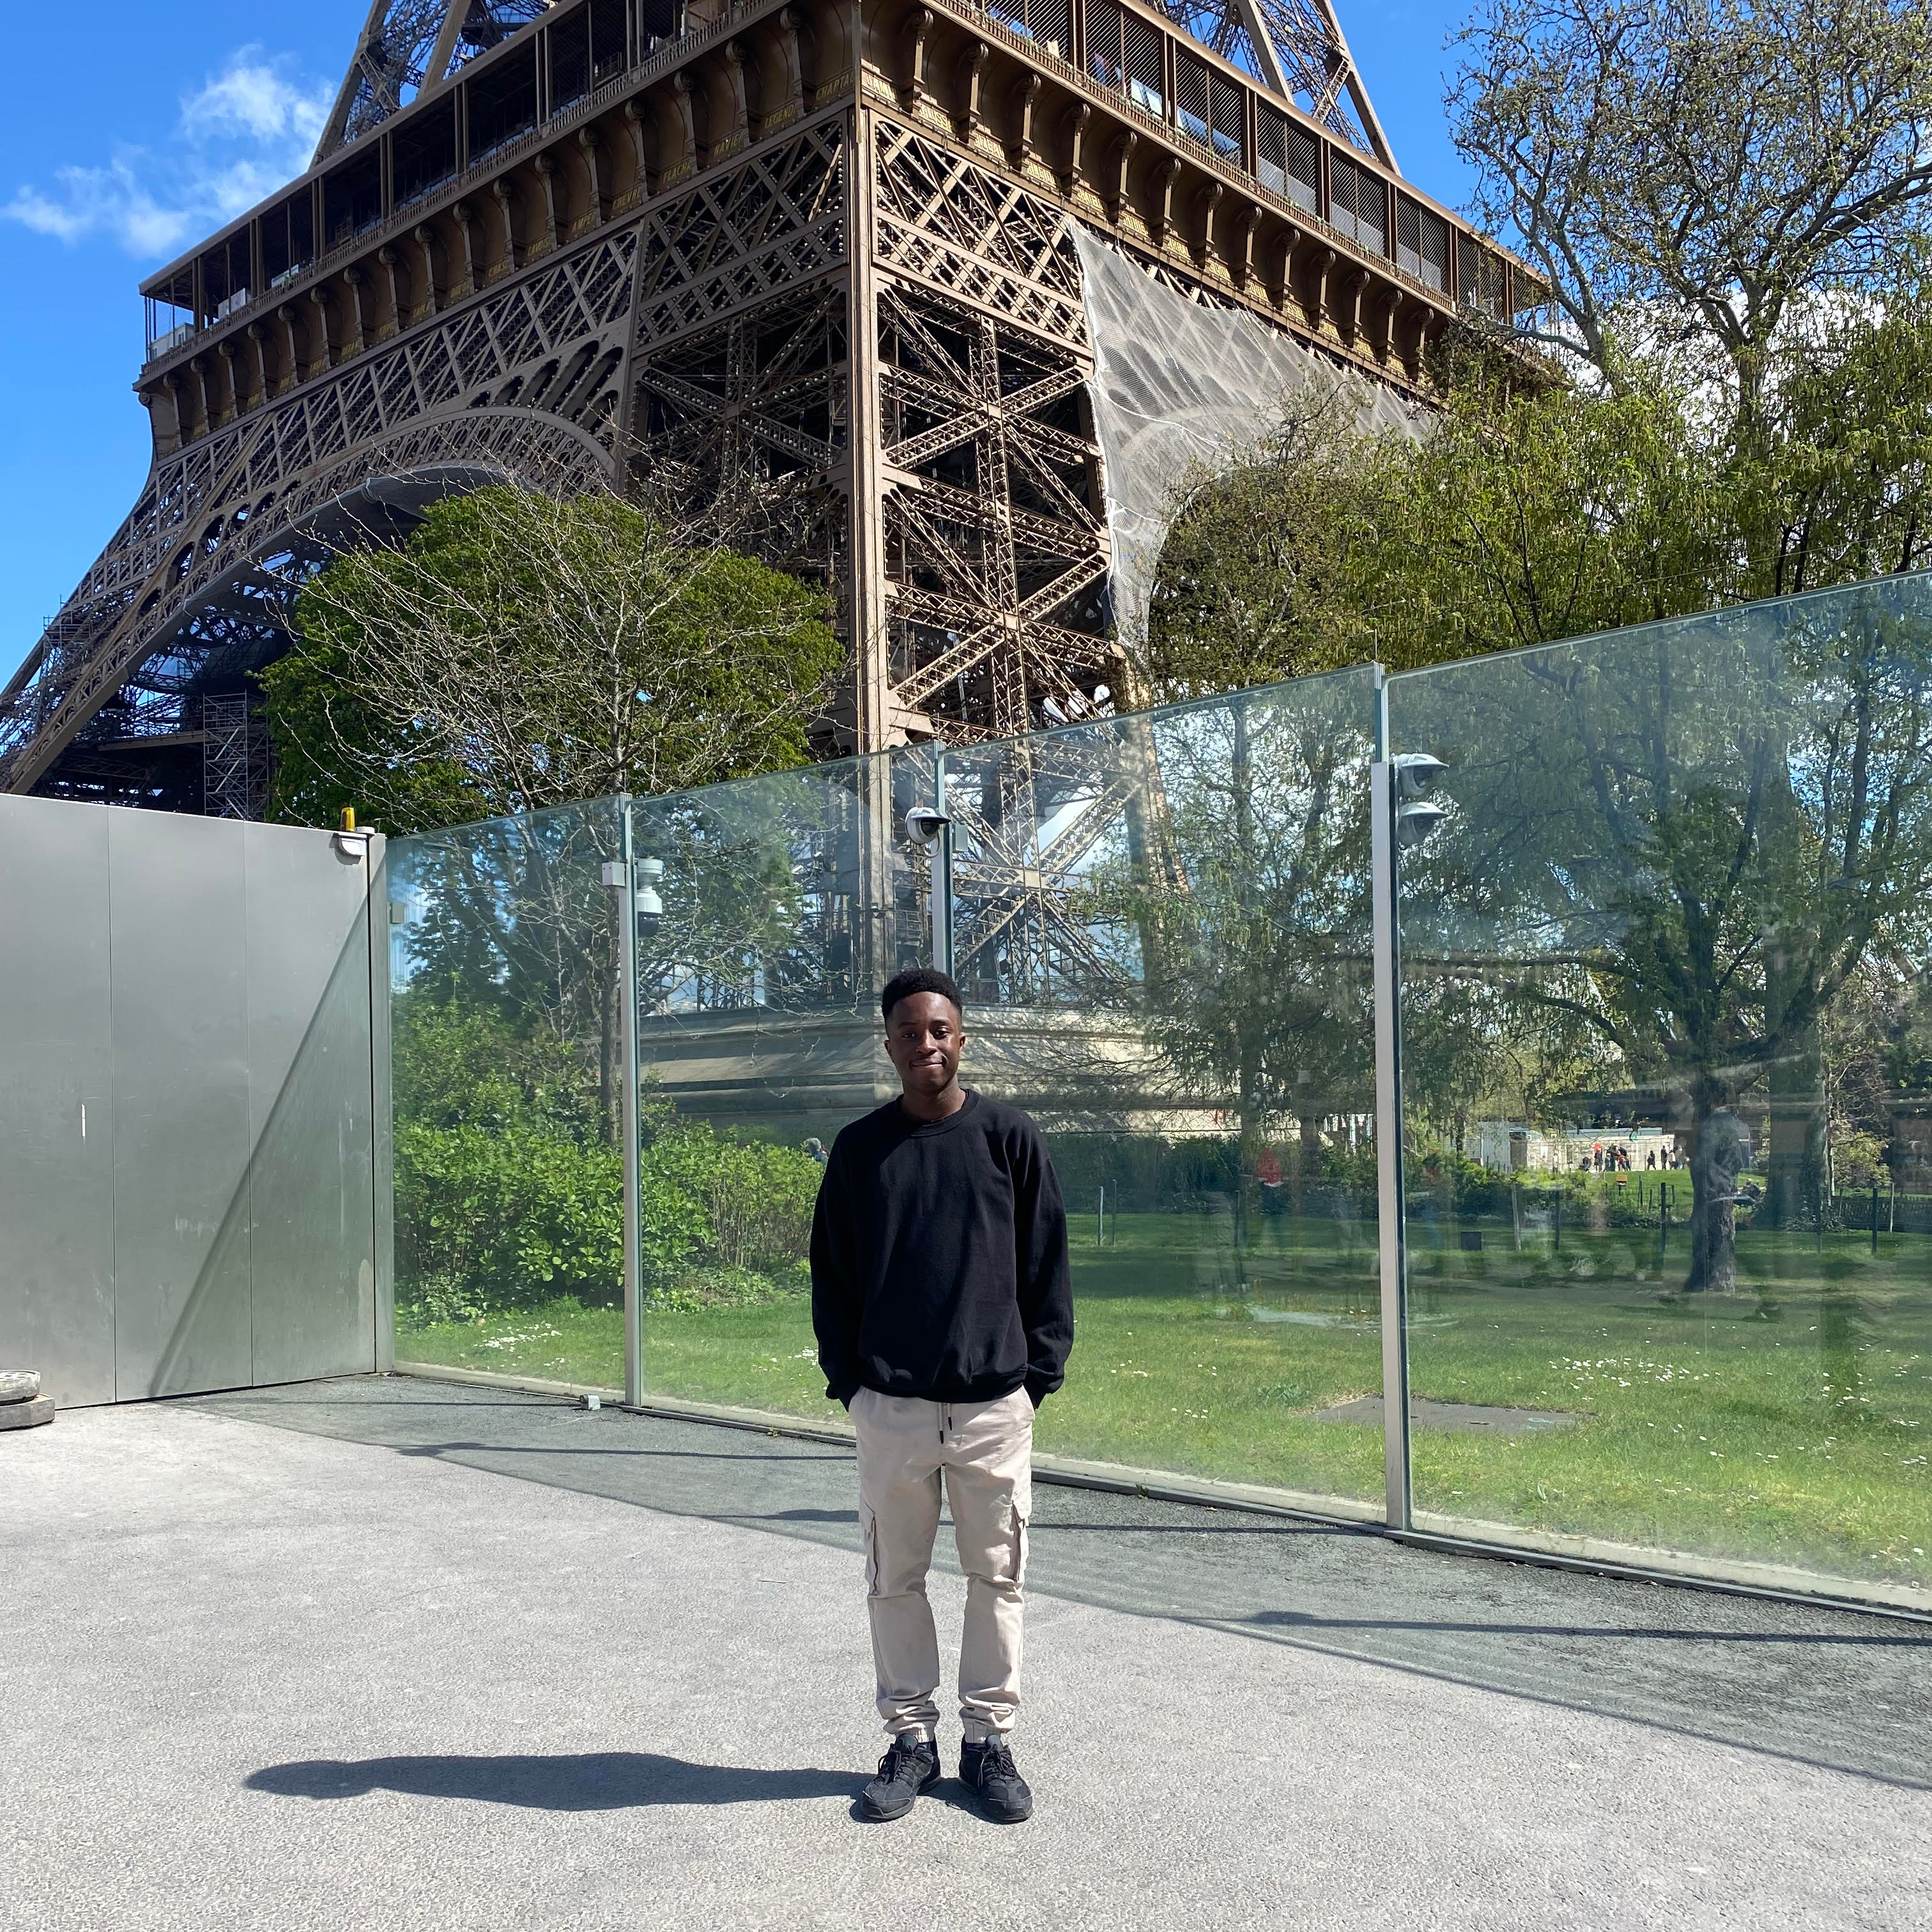 Ryan a young black man wearing a black shirt and grey jeans is standing in front of the Eiffel Tower in Paris